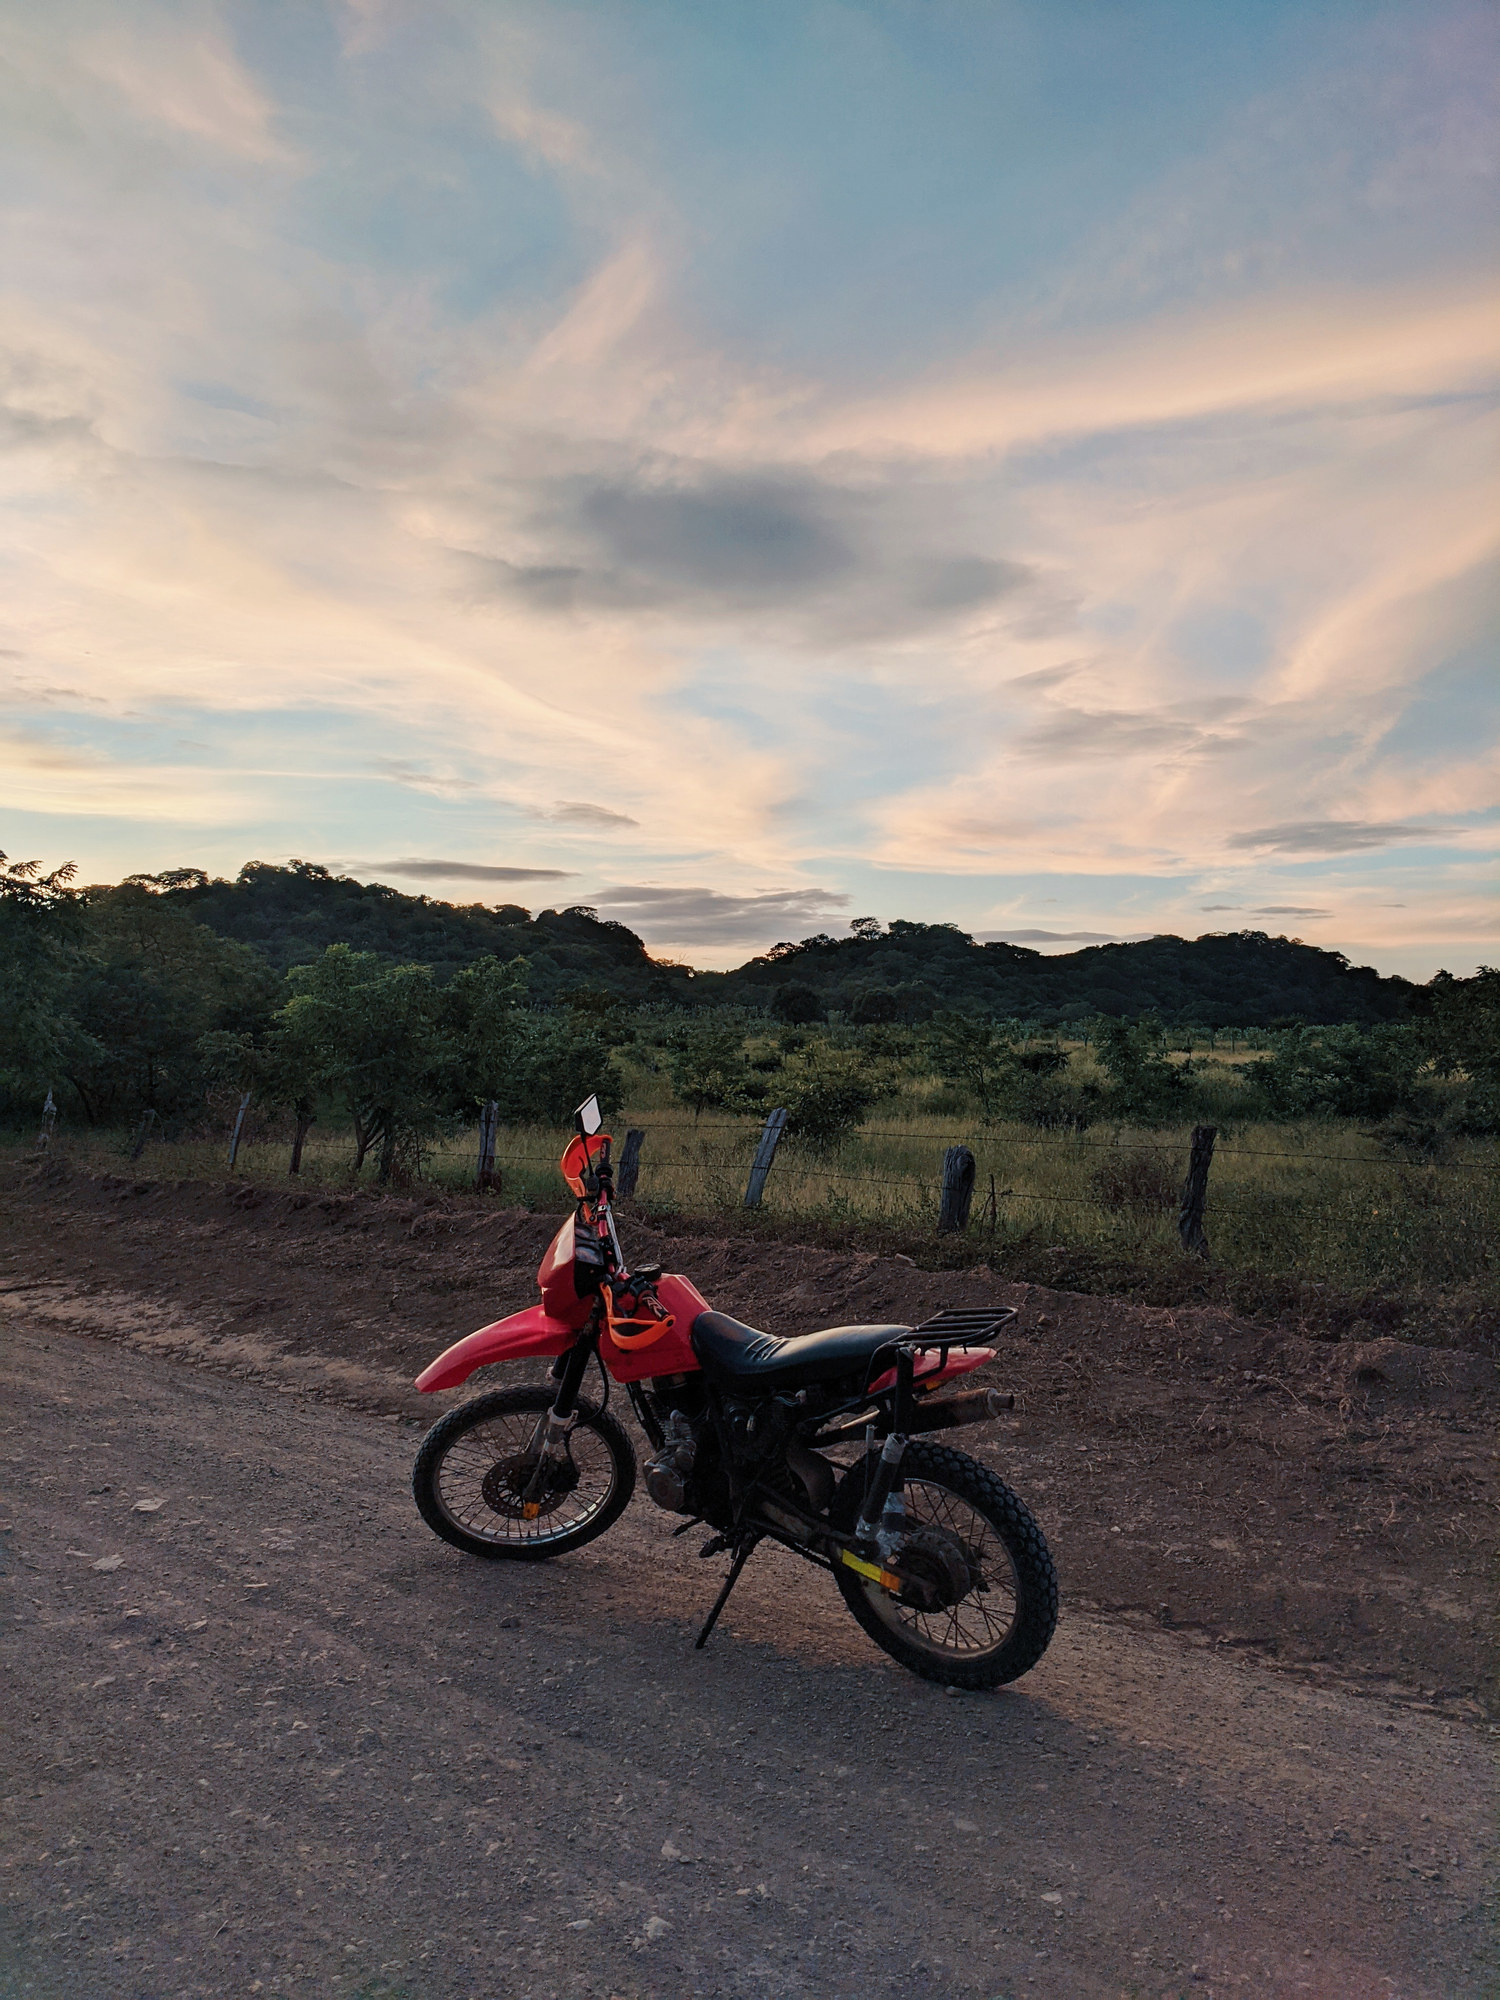 A motorcycle sits on a rural dirt road.